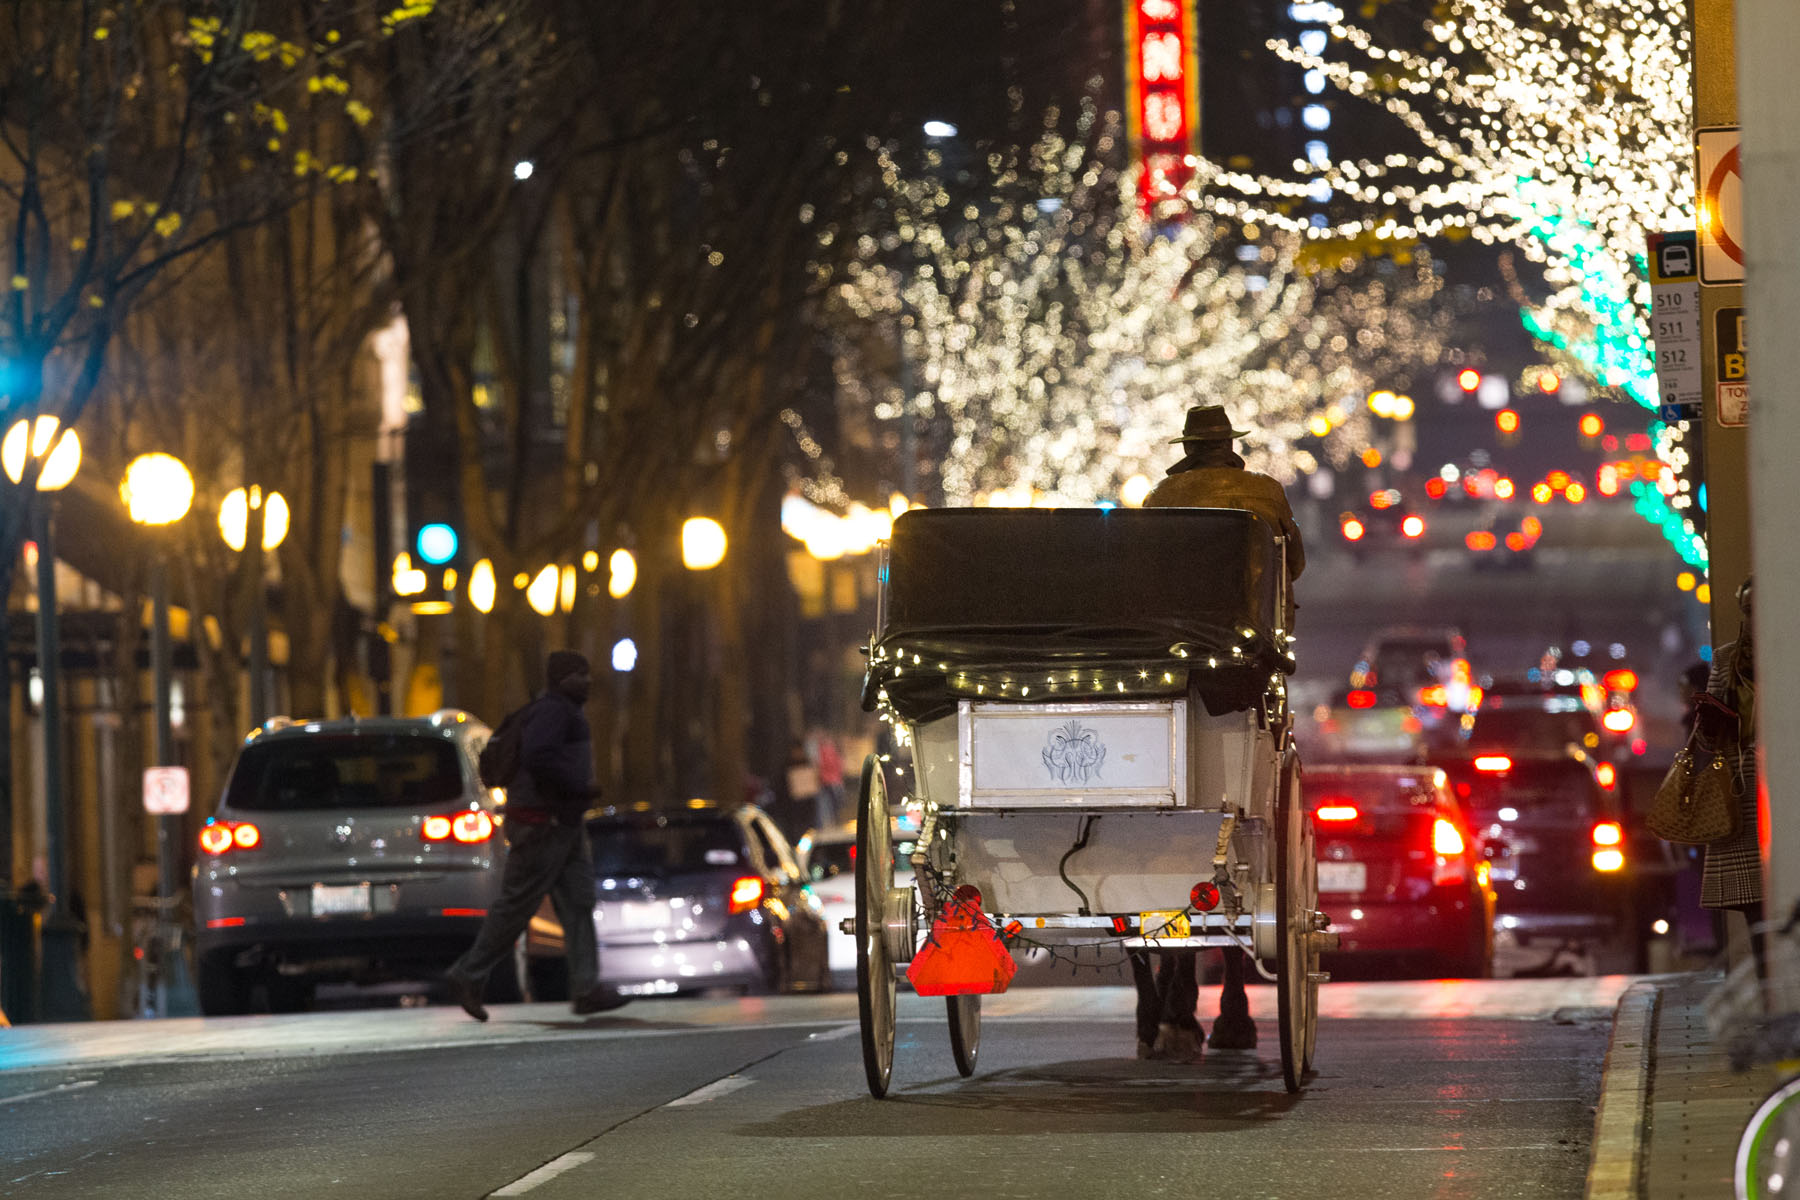 Steve Beckmann of Sealth Horse Carriages drives his horse and carriage down 5th Ave. in Seattle, WA on December 9, 2017. Beckmann says he was the first horse and carriage business in Seattle and now, 42 years later, he is the only one left. (© Karen Ducey)